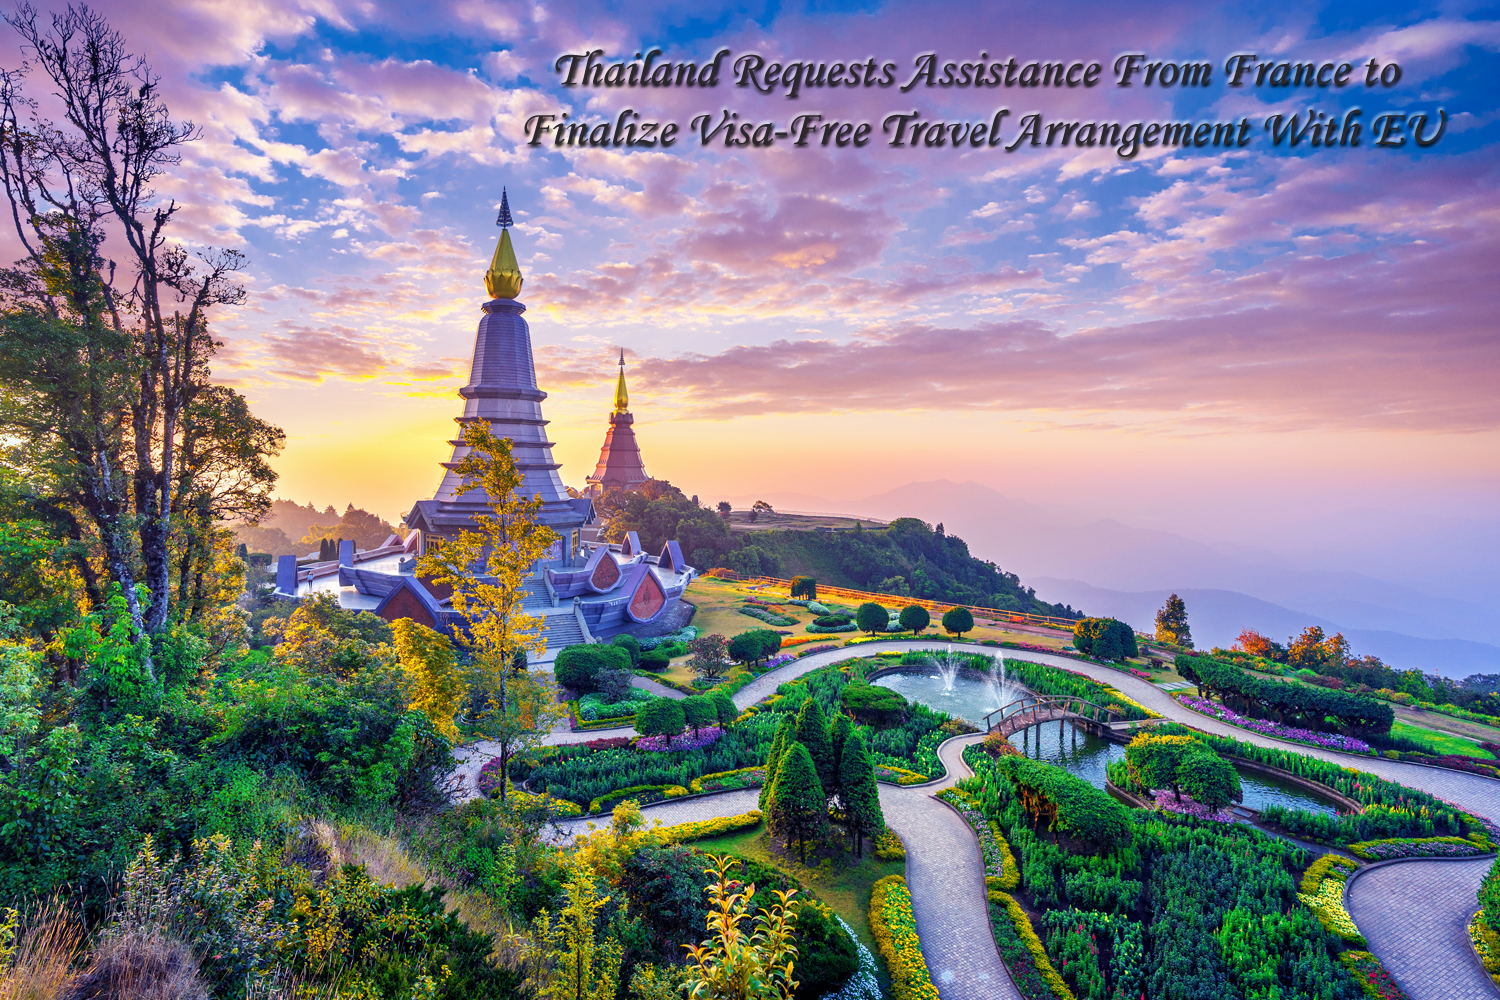 Thailand Requests Assistance From France to Finalize Visa-Free Travel Arrangement With EU.